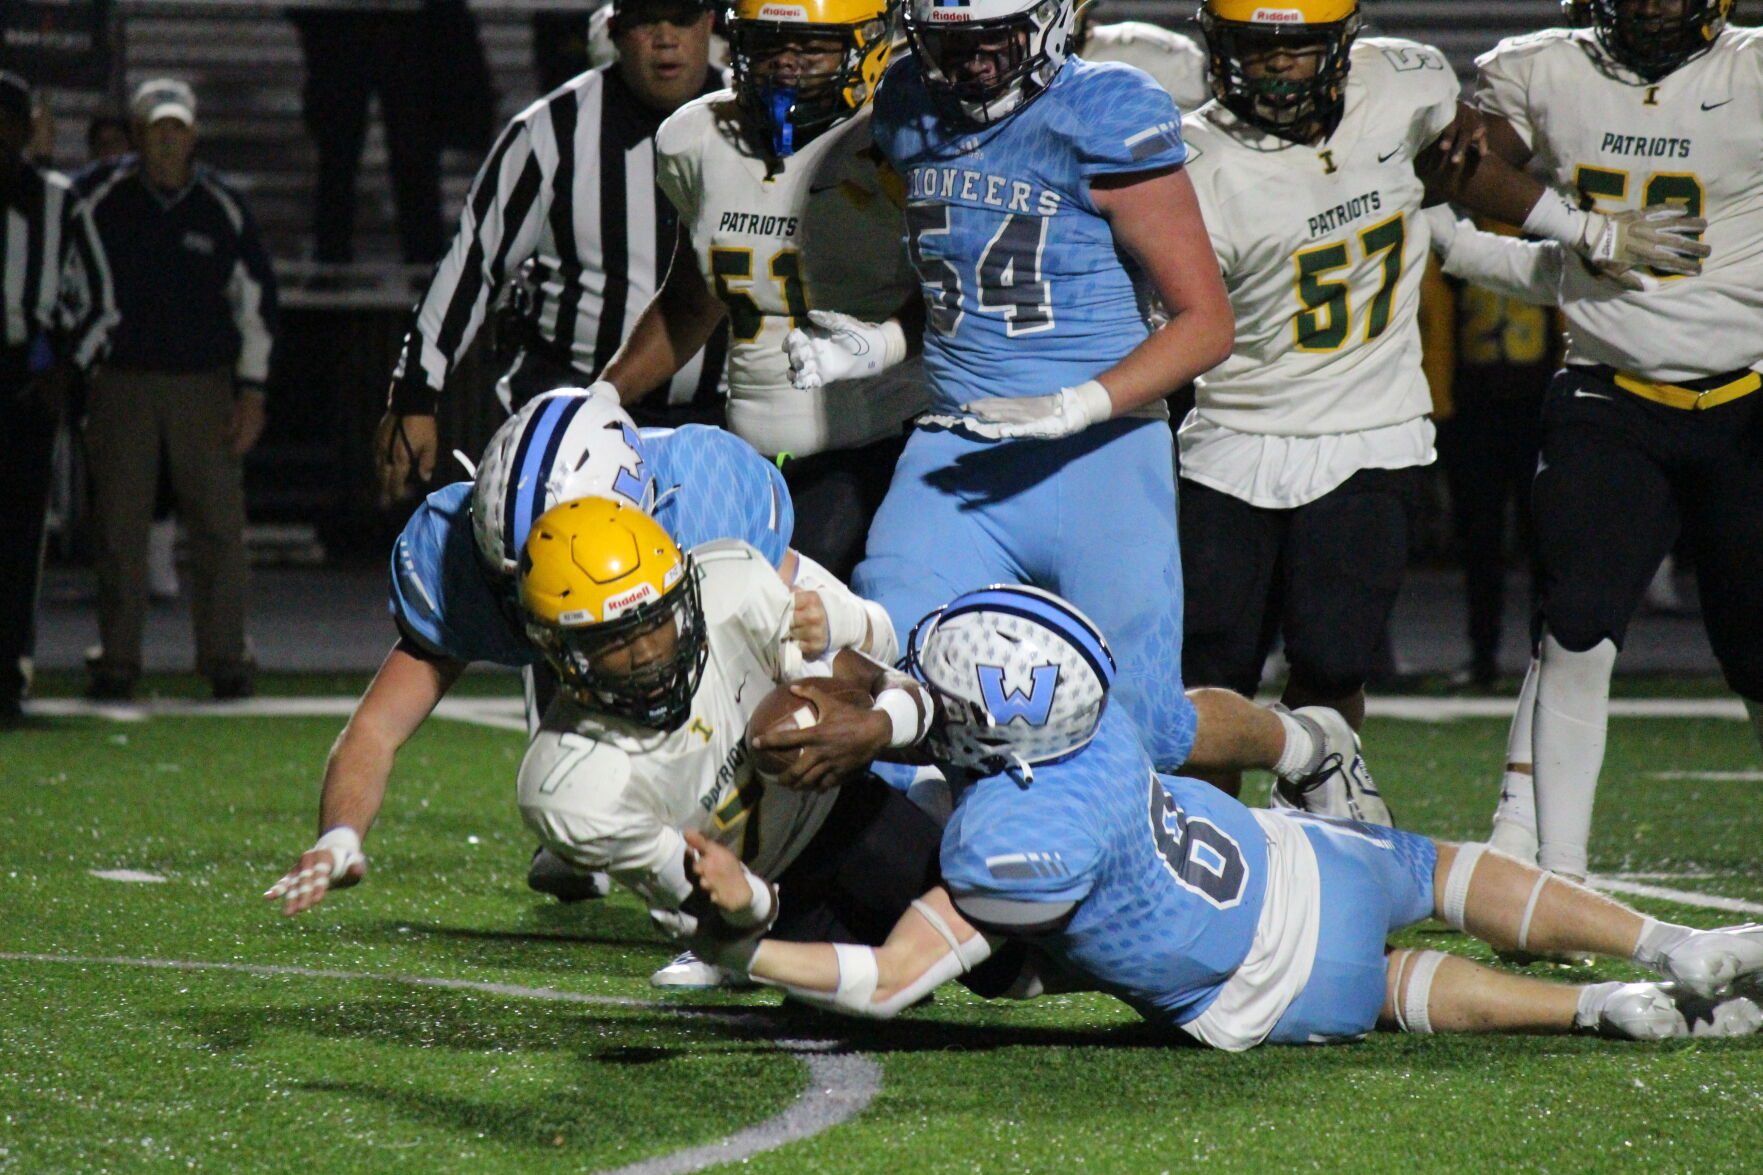 Independence knocks out Watauga in third round of 4A playoffs with 34-14 road win